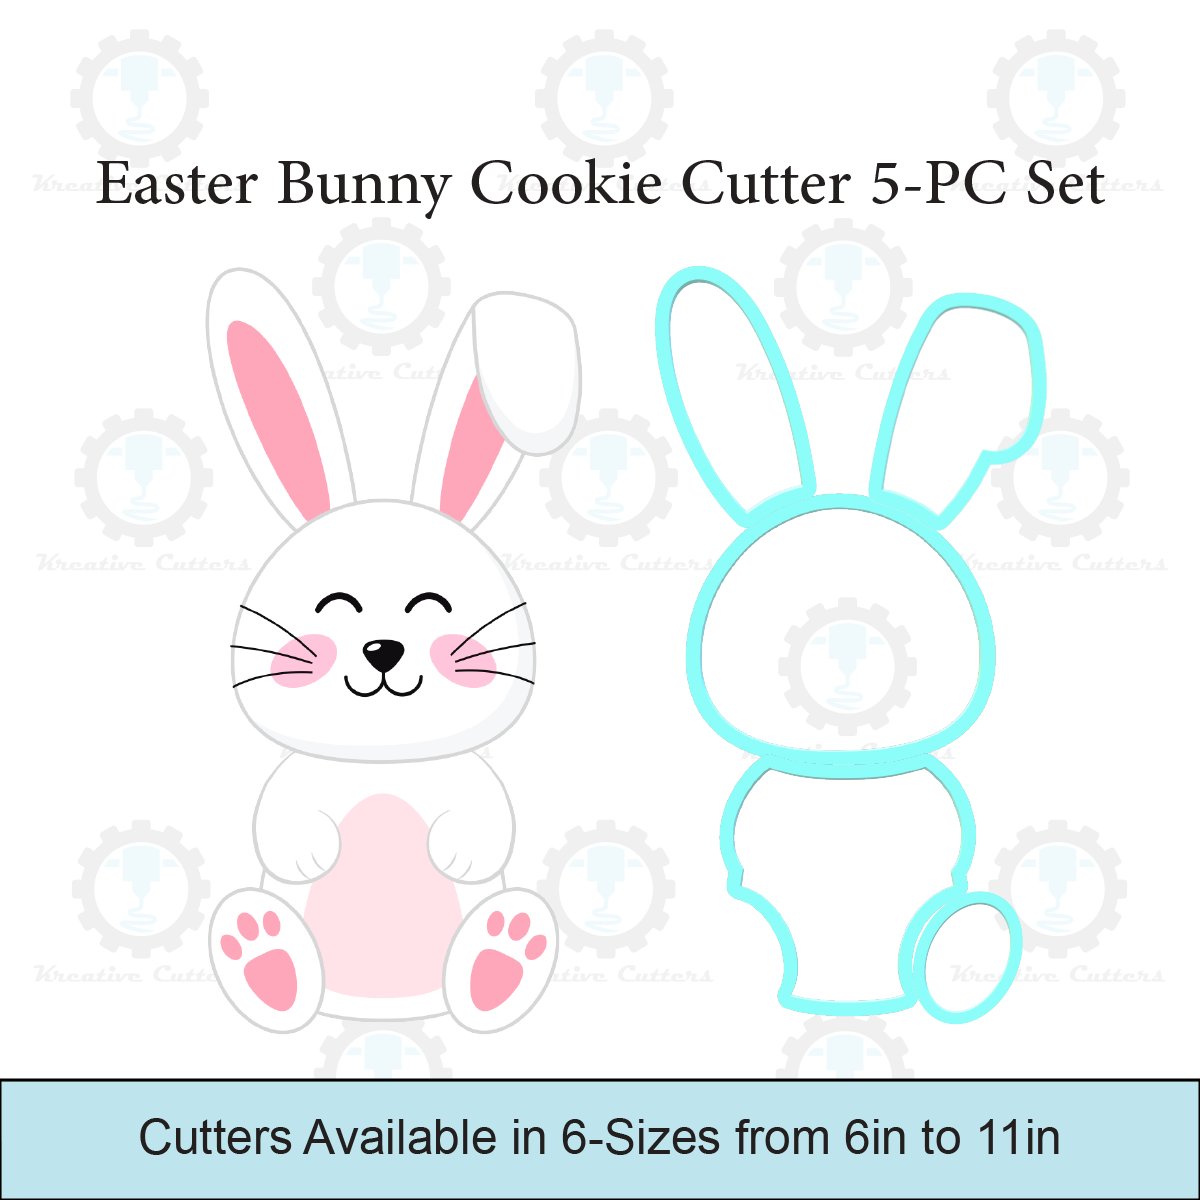 Giant 5-PC Easter Bunny Cookie Cutter | Multi Cutter